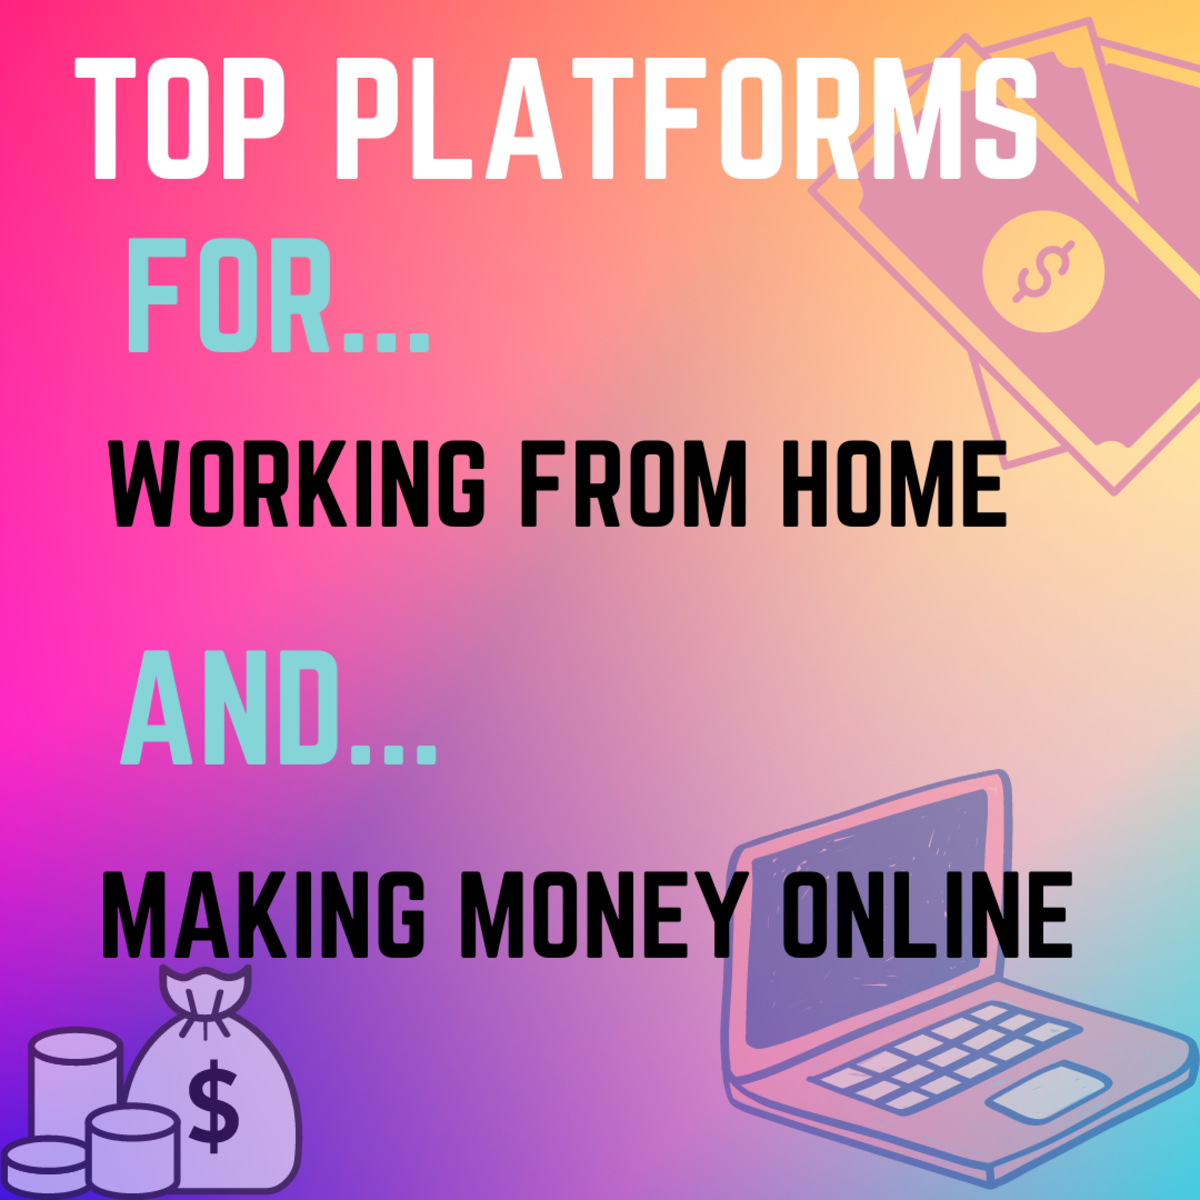 Top Platforms for Working From Home and Making Money Online